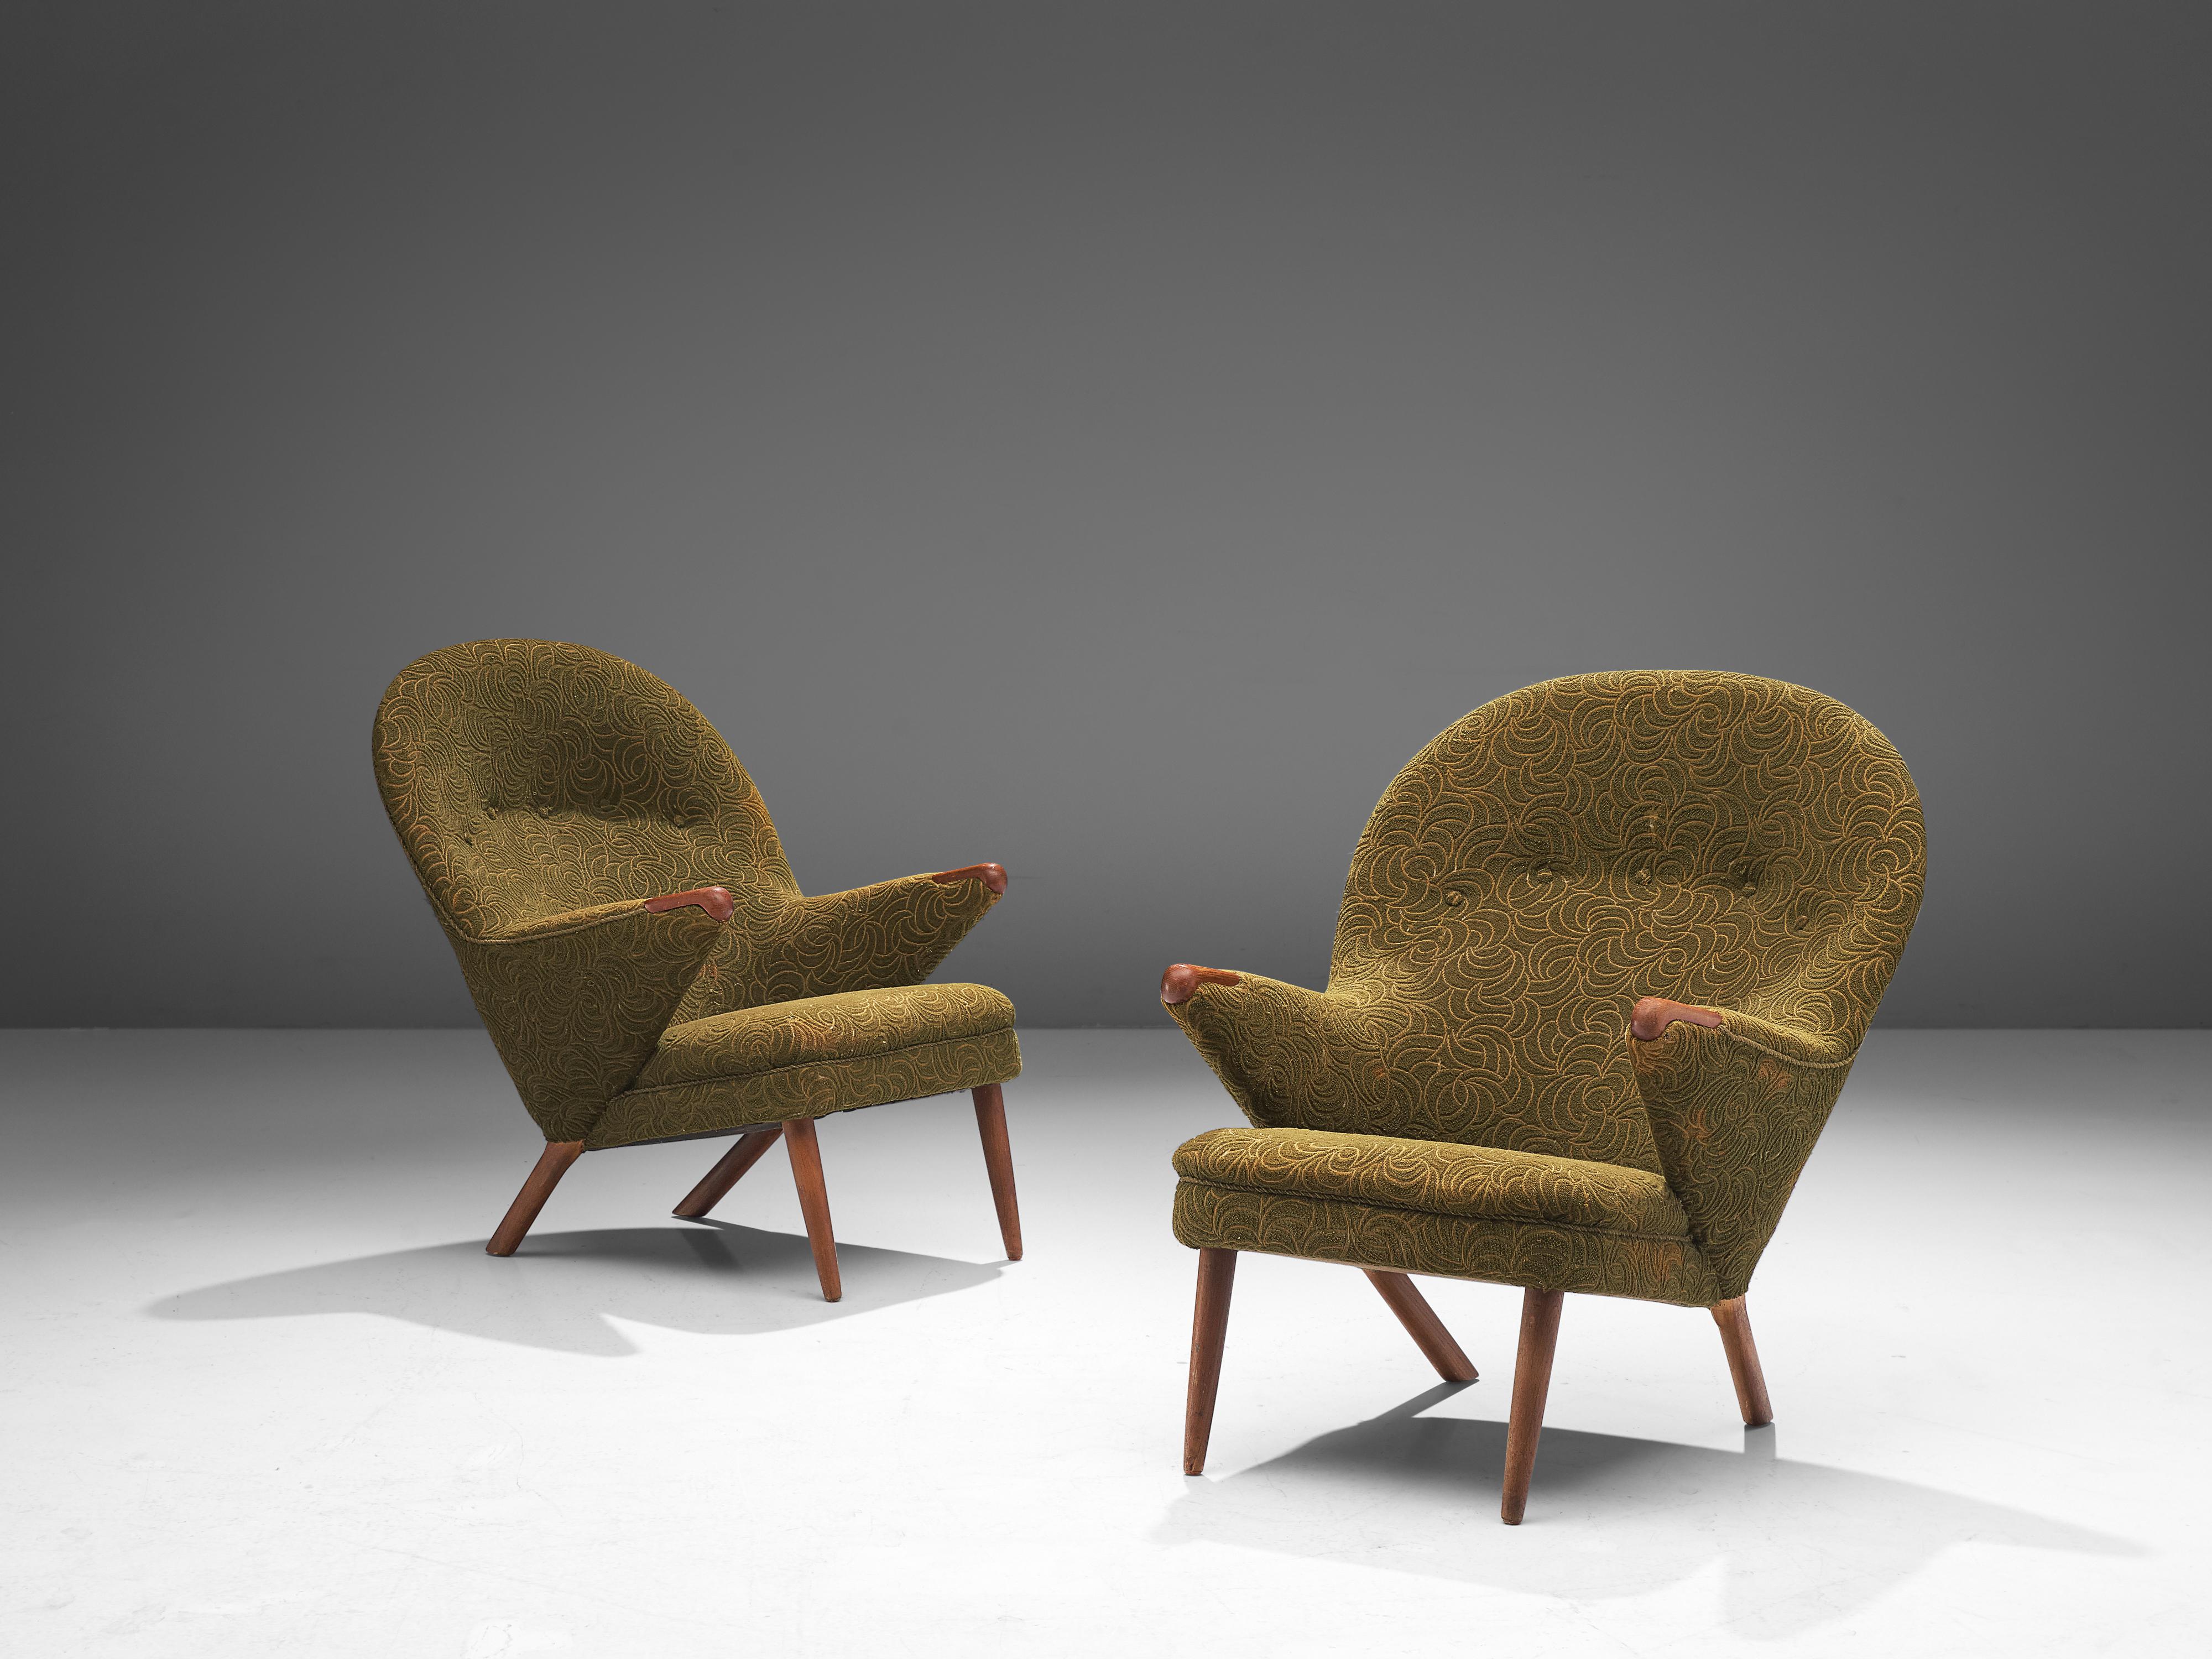 Georg Thams for Vejen Polstermøbelfabrik, lounge chairs model 47, teak, fabric upholstery, Denmark, 1957

Comfortable lounge chairs by Danish designer Georg Thams. The model 47 features a high back in a round shape that invites the user to take a